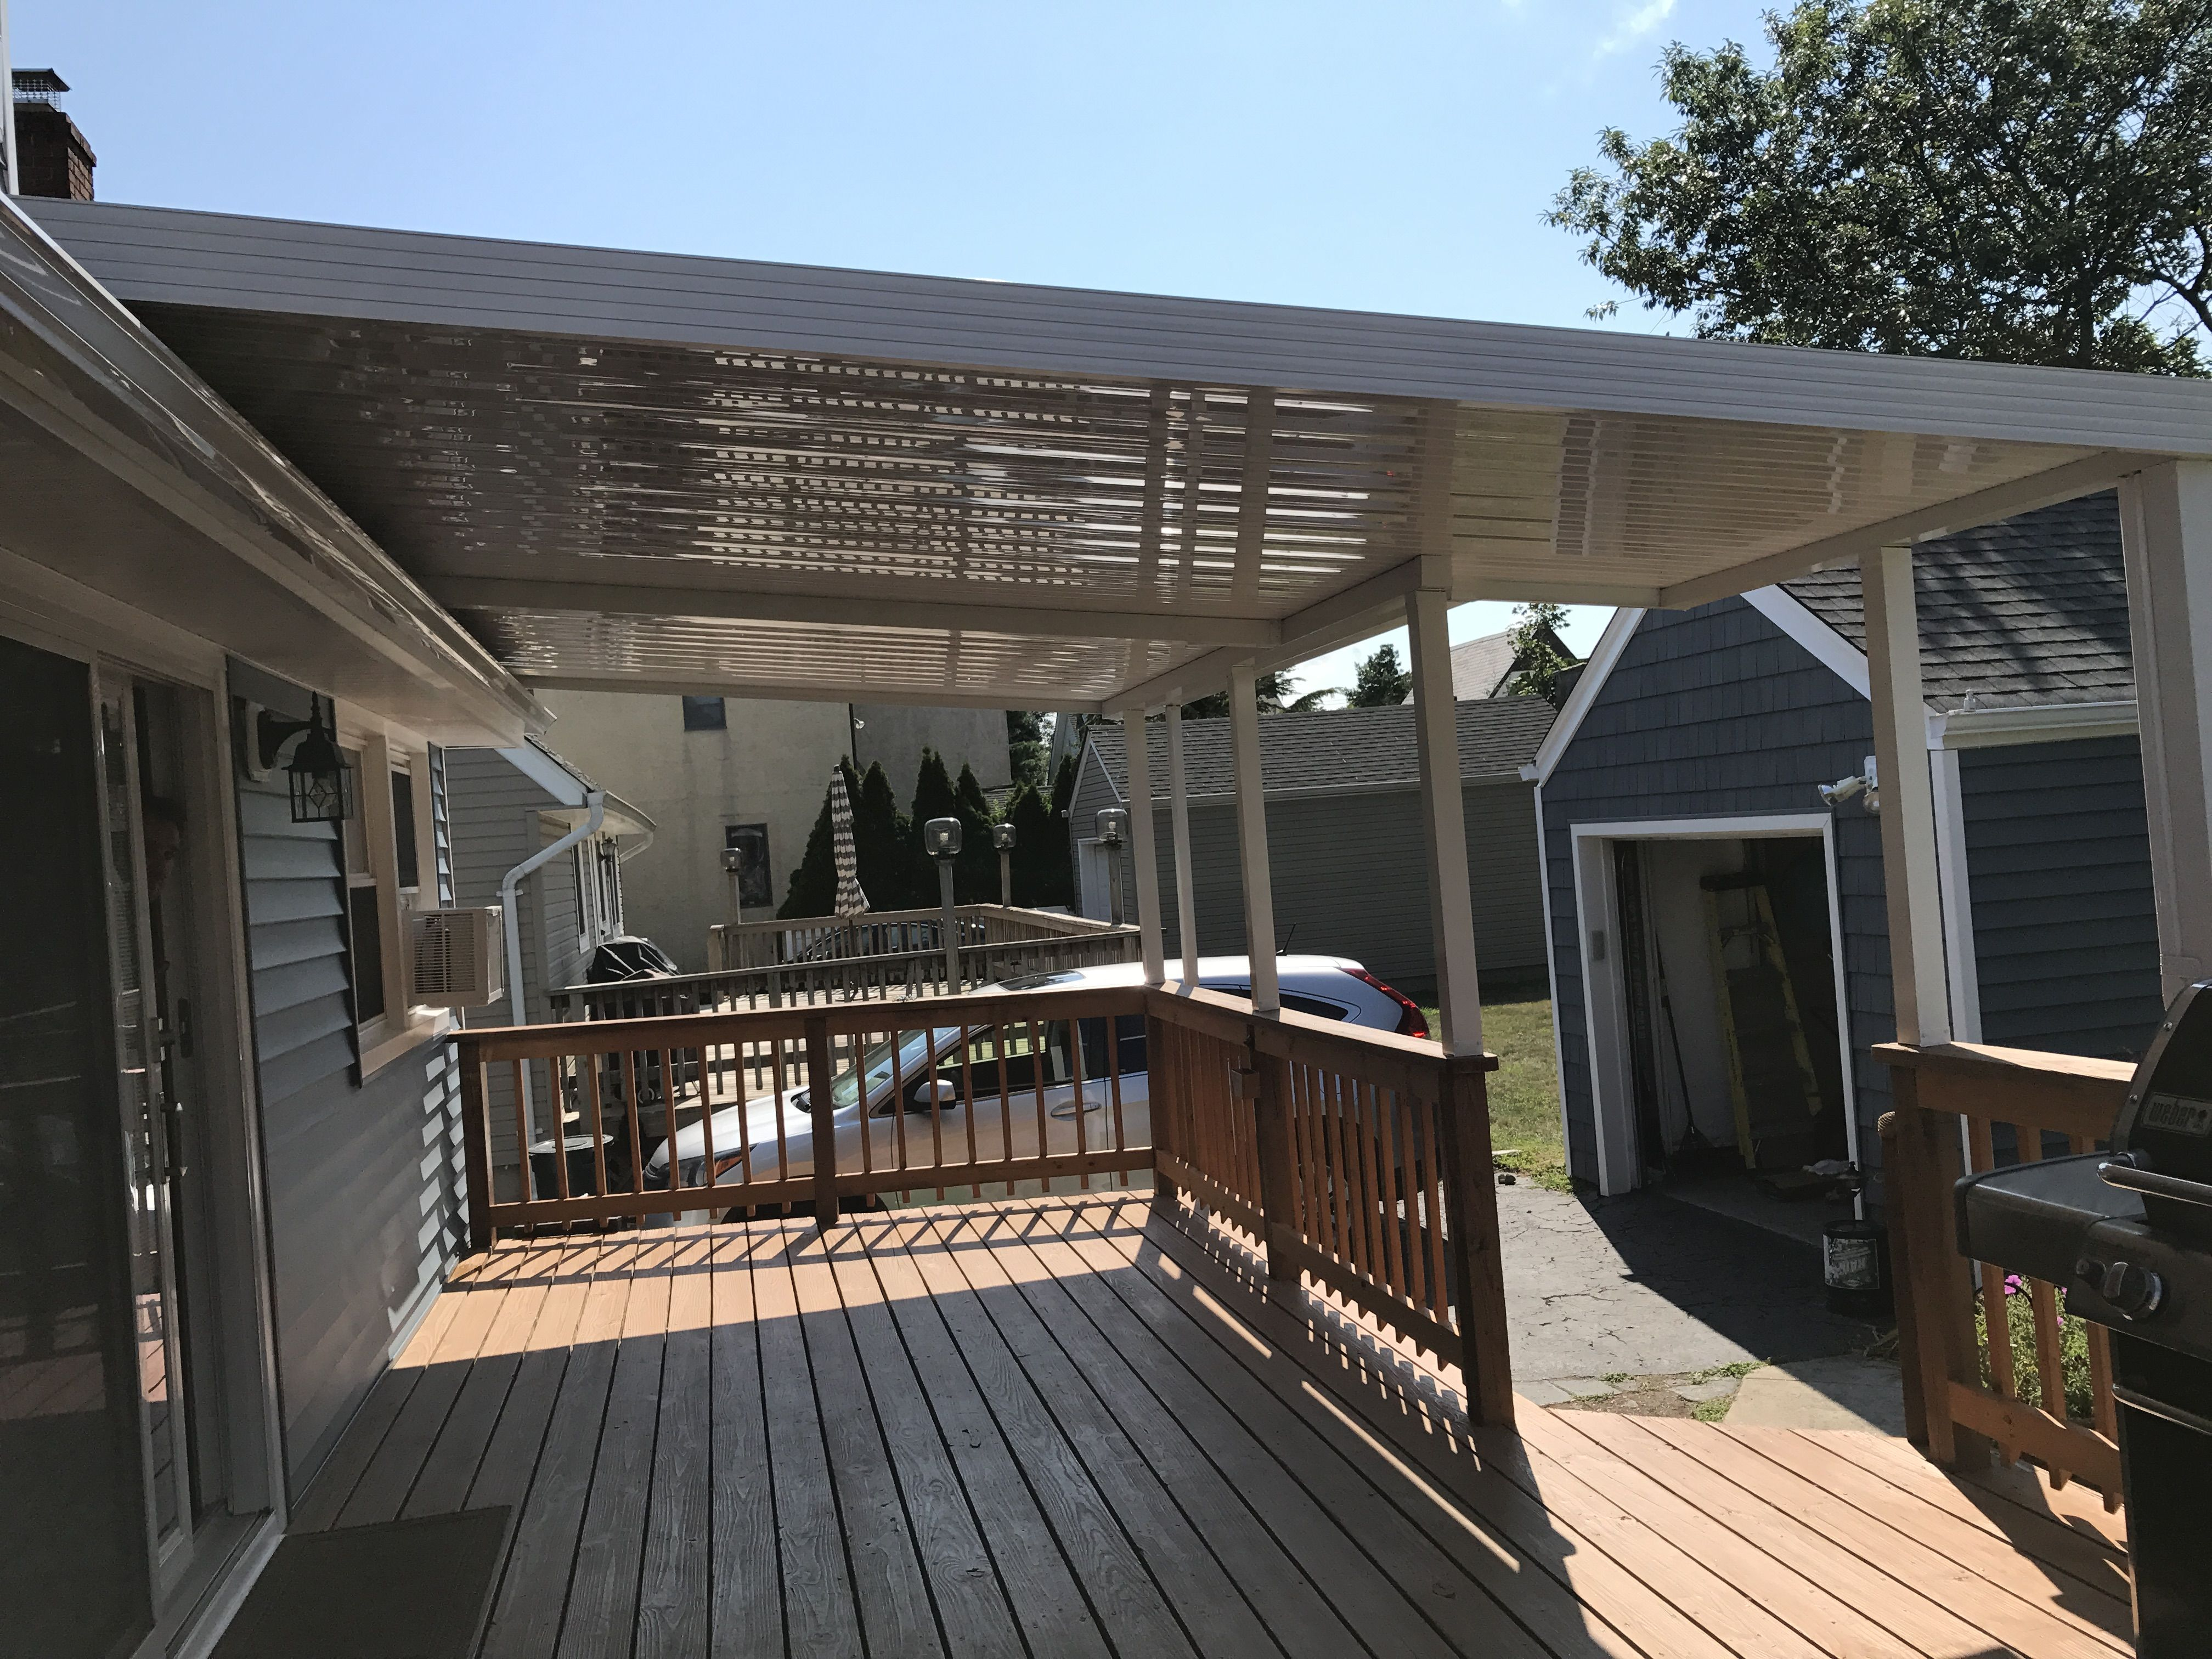 Our Modern Patio Covers Protects Your Deck Patio Or Doorway with sizing 4032 X 3024